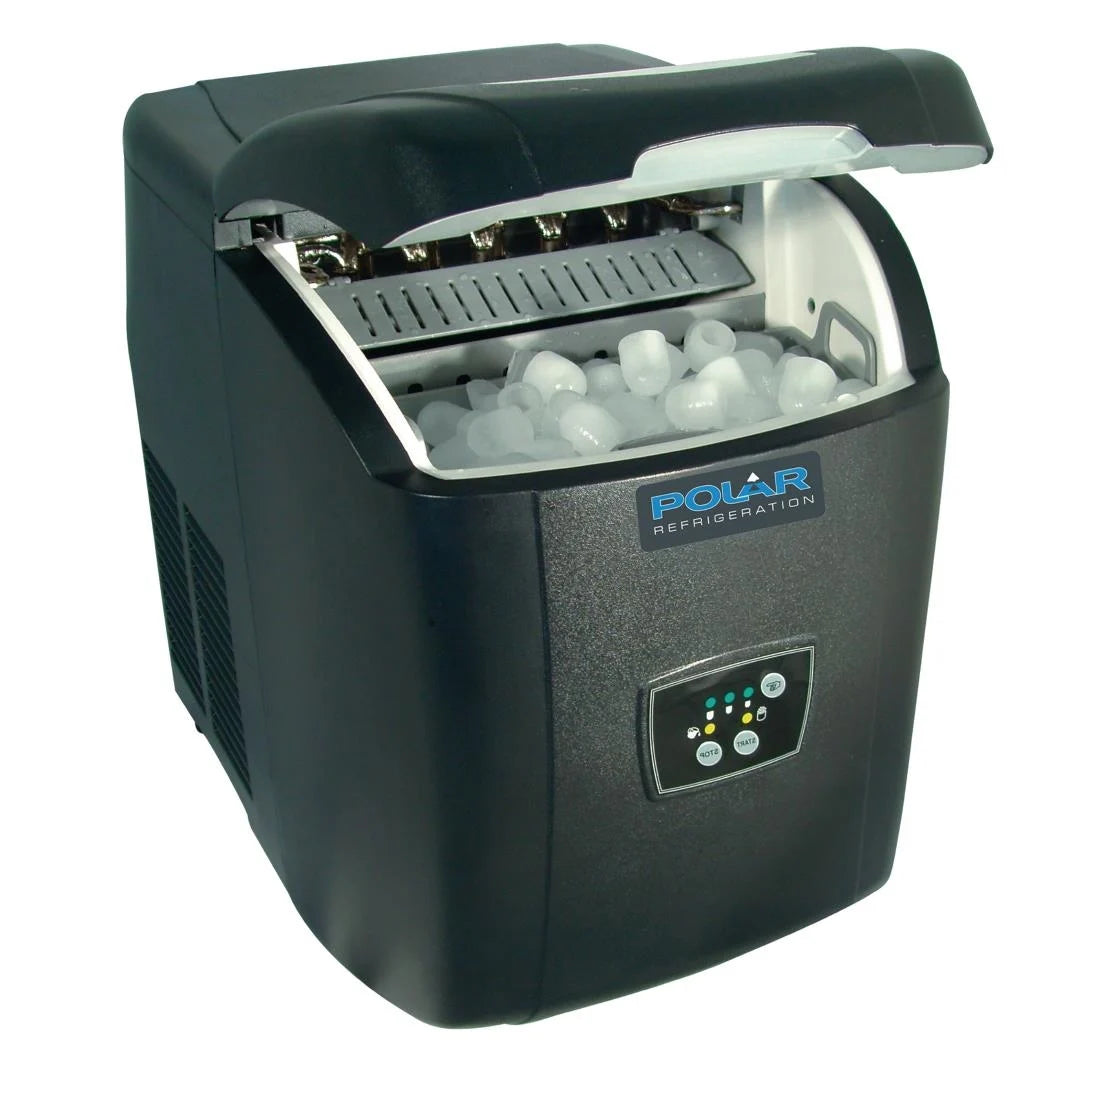 Polar C-Series Countertop Ice Machine 11kg Output.Product Ref:00546.MODEL:T315.🚚 4-6 Days Delivery